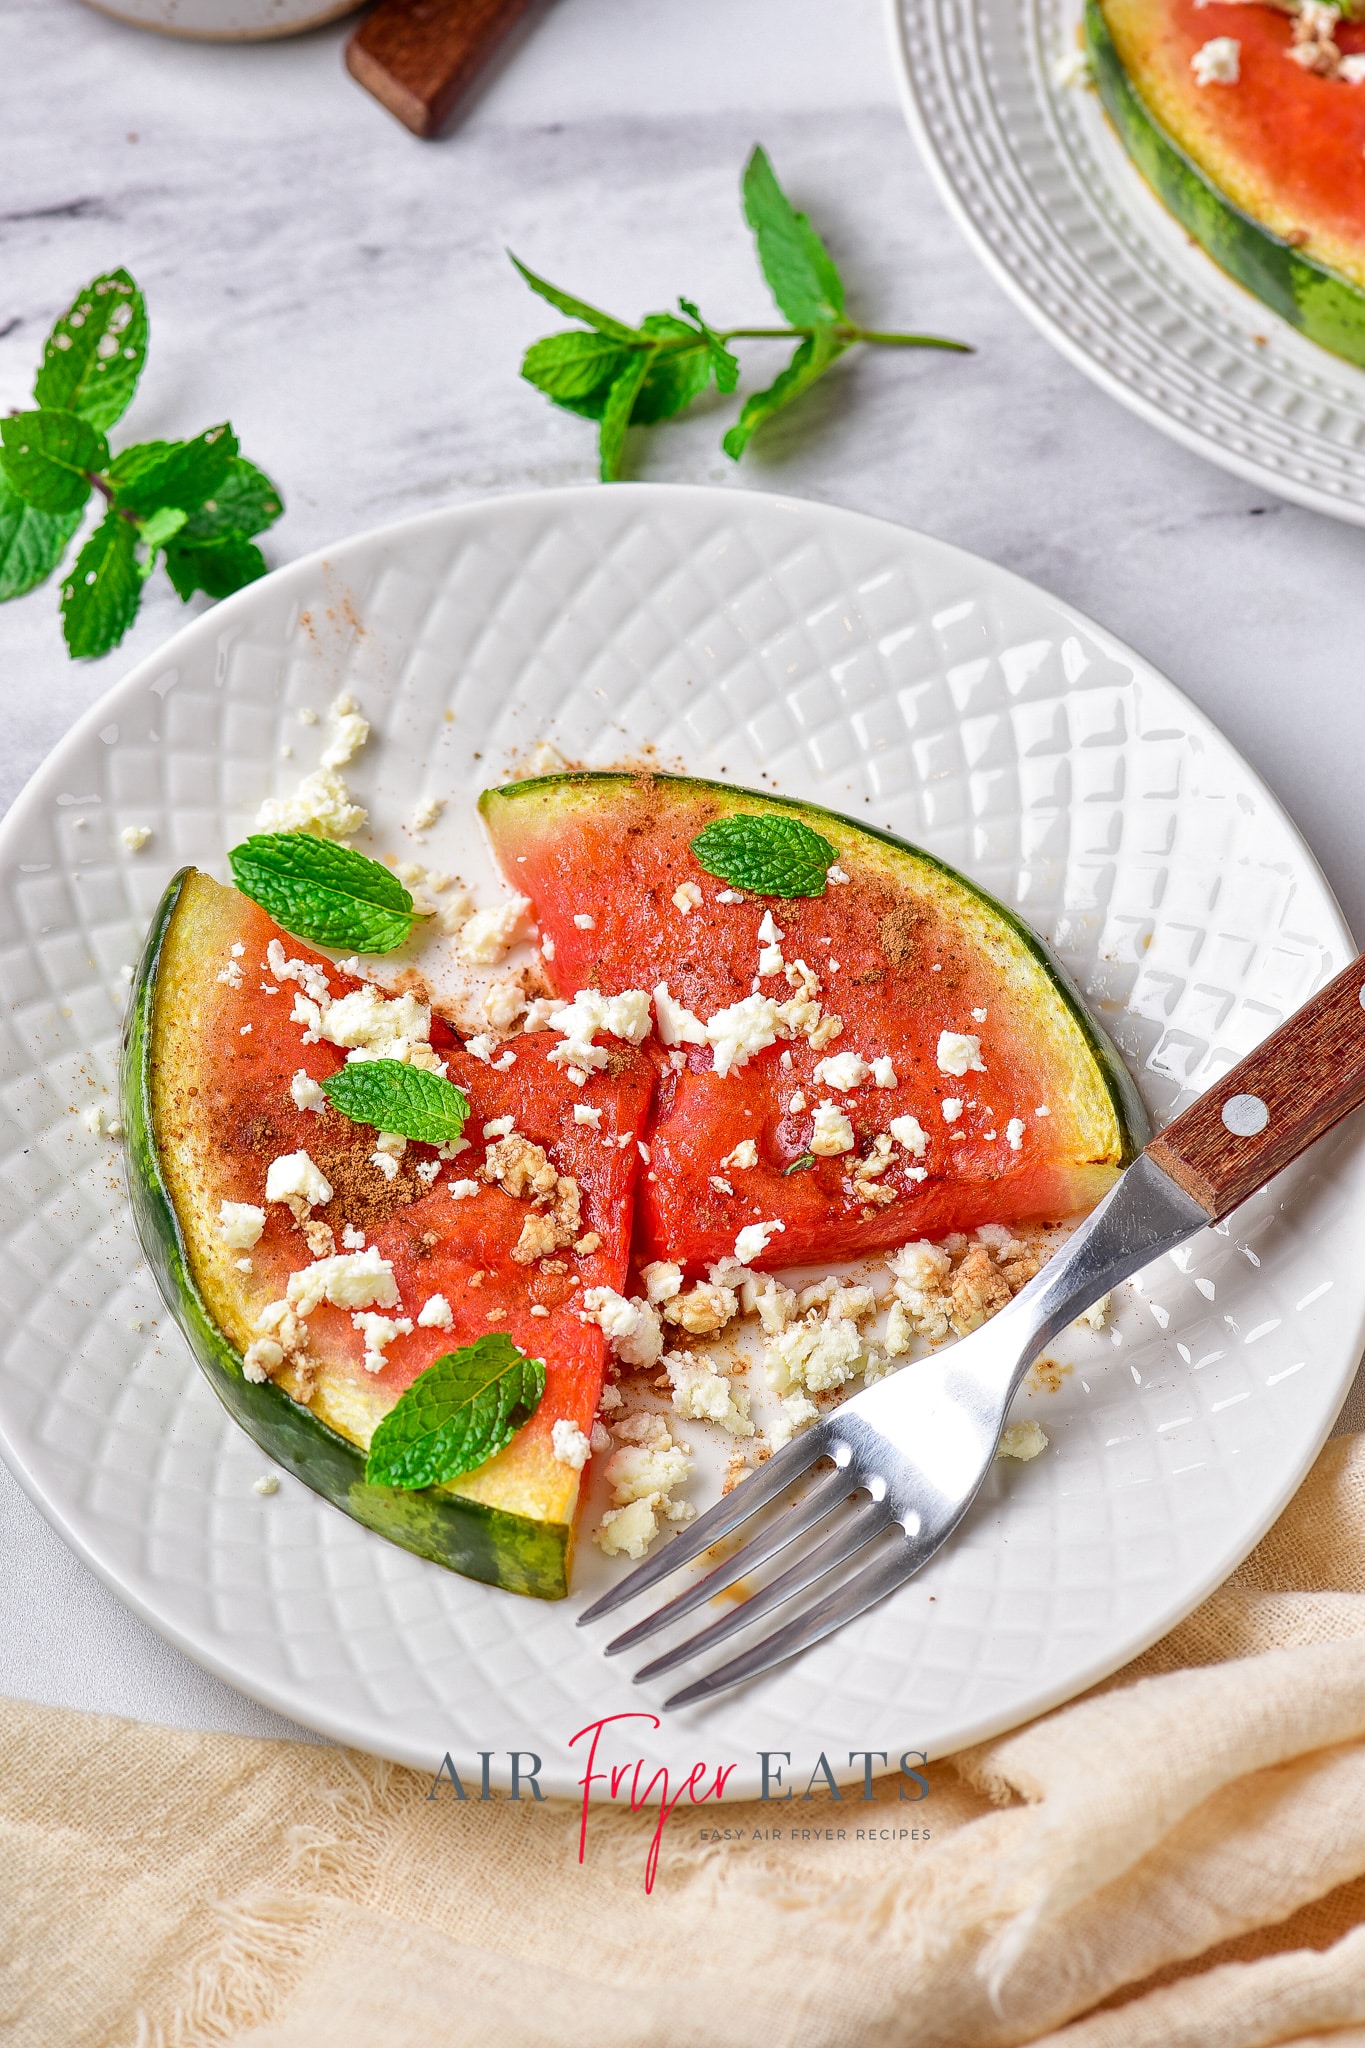 two pieces of air fried watermelon topped with fresh mint, dressing, and feta cheese, on a plate.